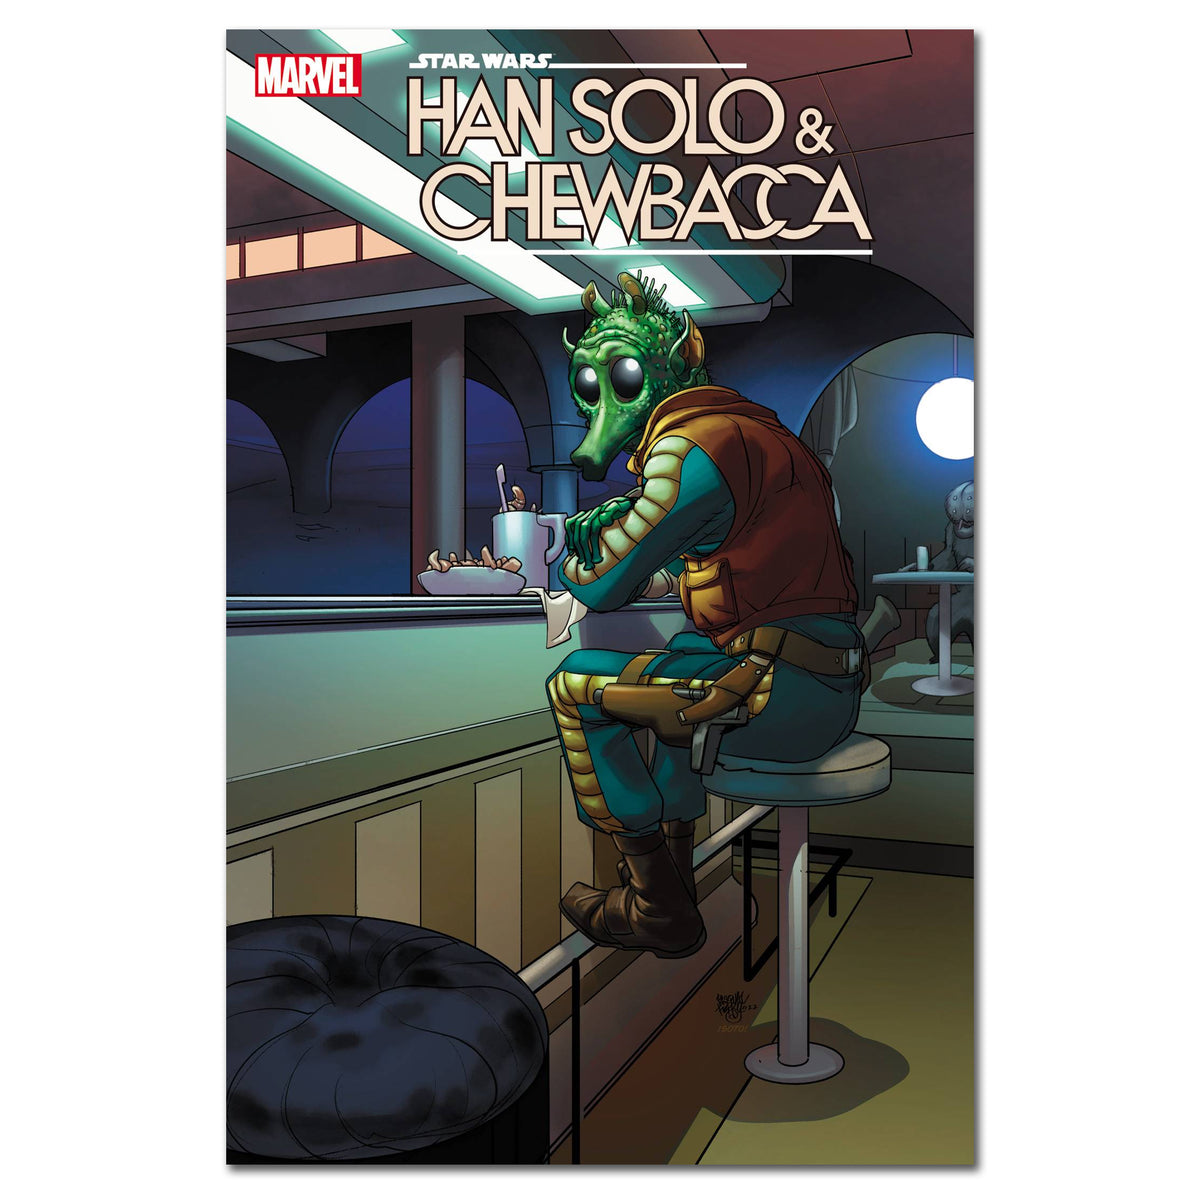 Star Wars Han Solo &amp; Chewbacca #7 Cover Variant FERRY FINALSALE